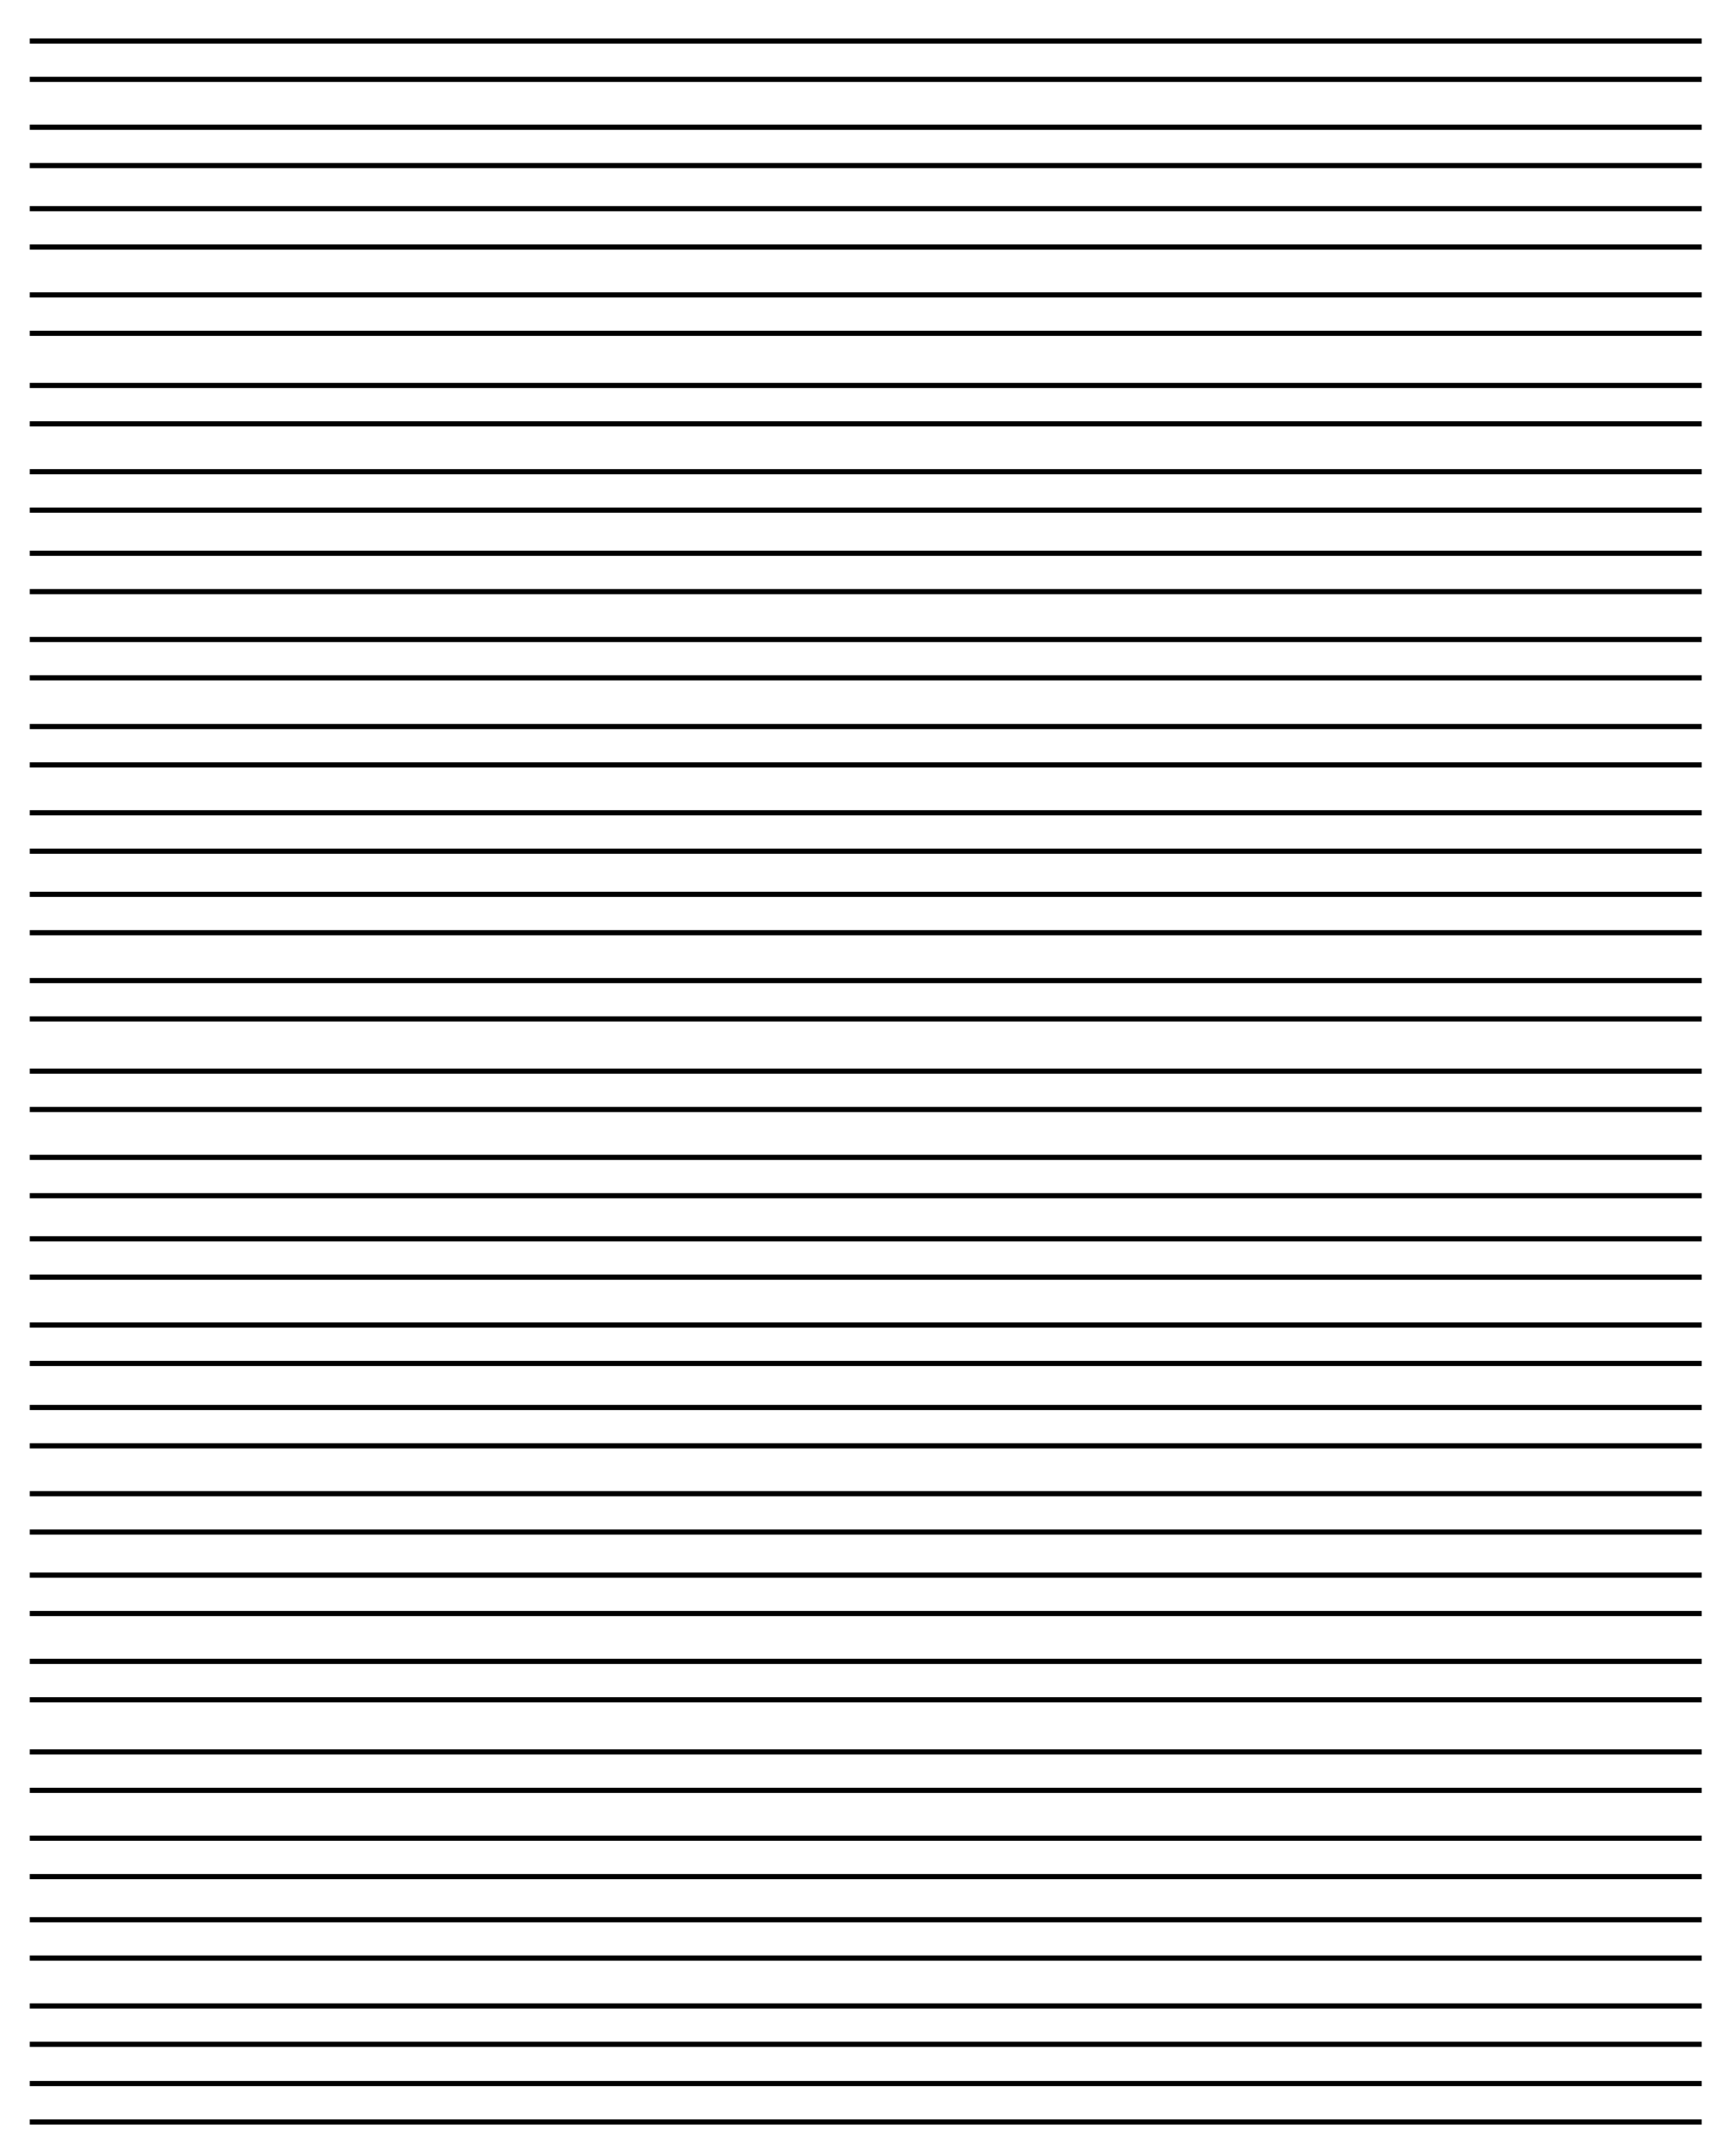 ❤️20+ Free Printable Blank Lined Paper Template In Pdf❤️ Intended For Microsoft Word Lined Paper Template